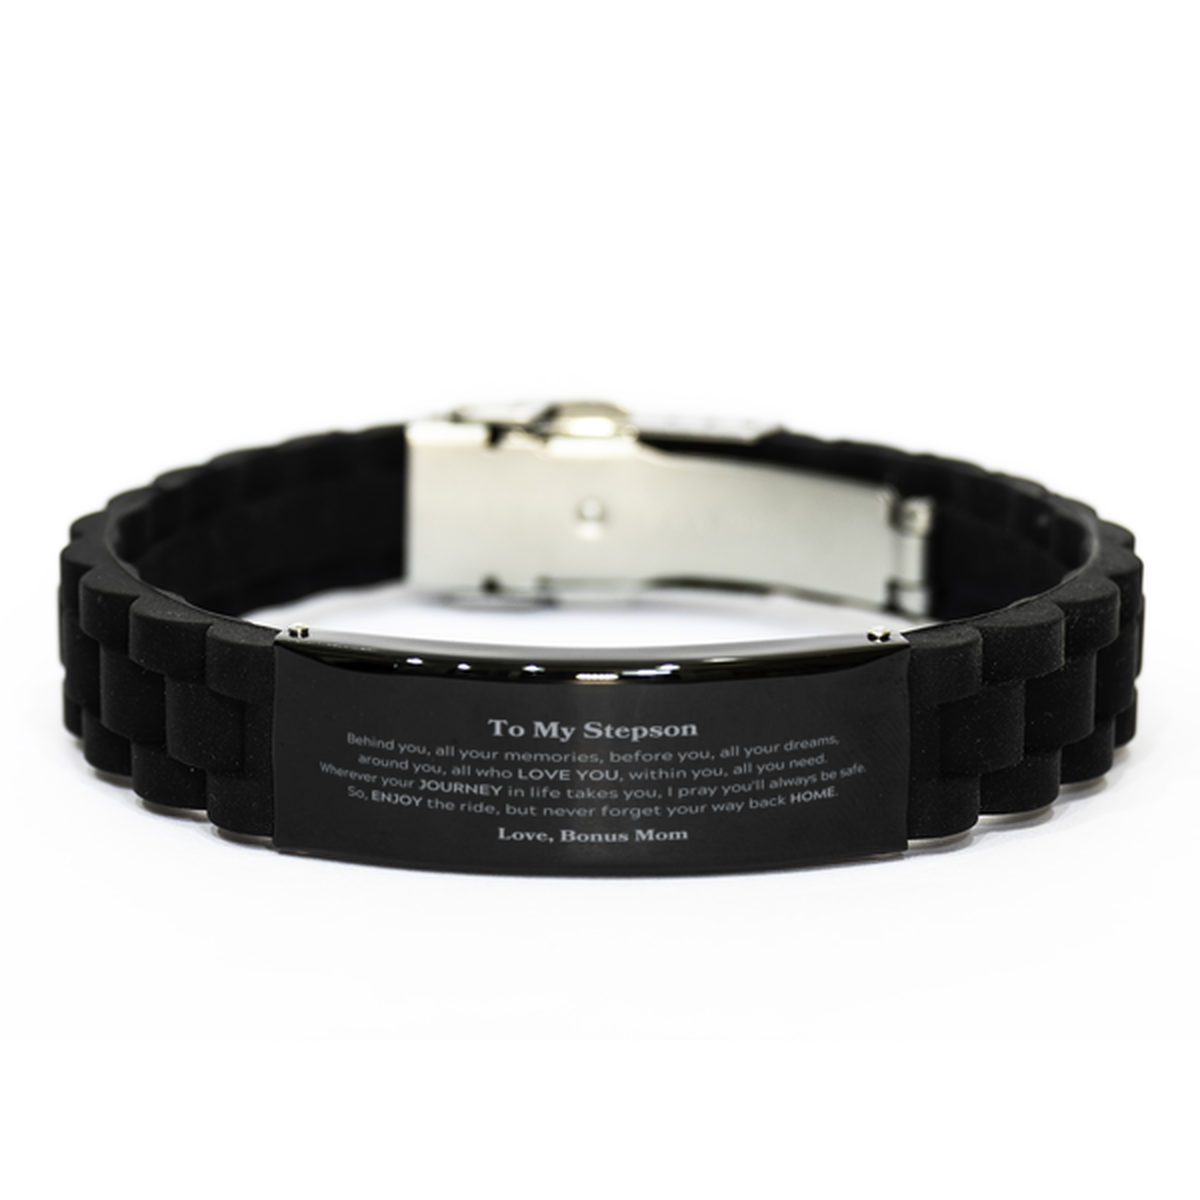 To My Stepson Graduation Gifts from Bonus Mom, Stepson Black Glidelock Clasp Bracelet Christmas Birthday Gifts for Stepson Behind you, all your memories, before you, all your dreams. Love, Bonus Mom